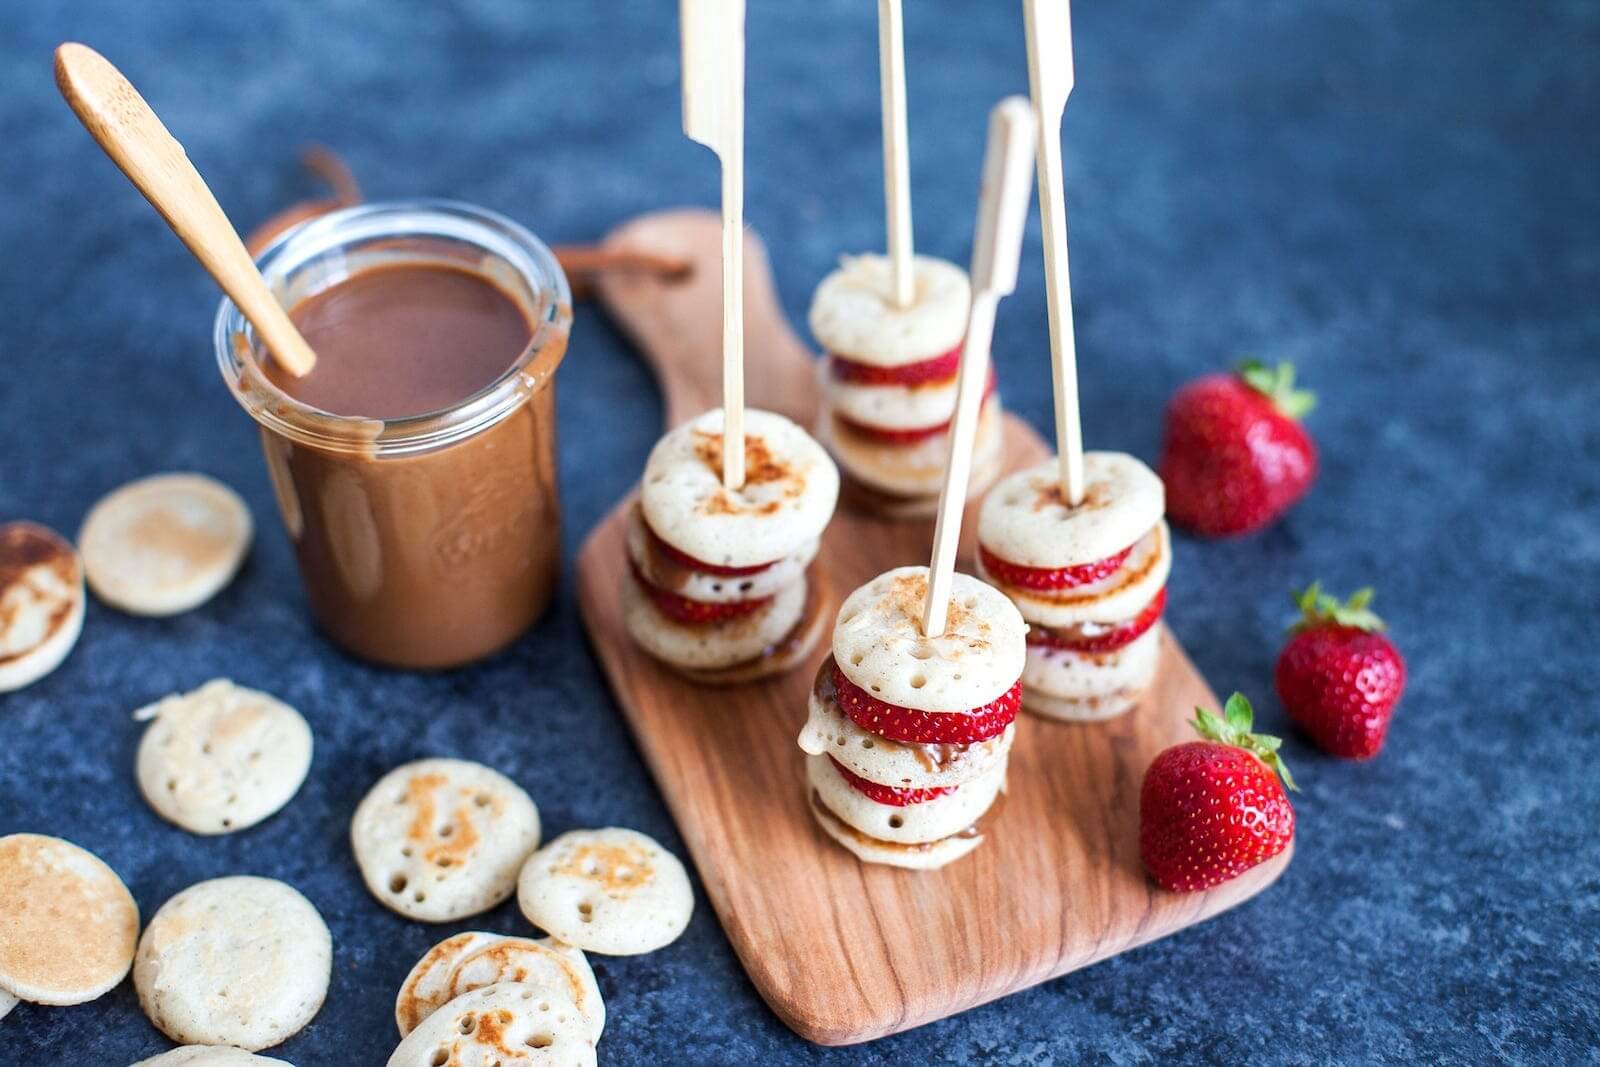 Image of Mini Pancake Skewers with Hazelnut Butter and Fresh Fruits